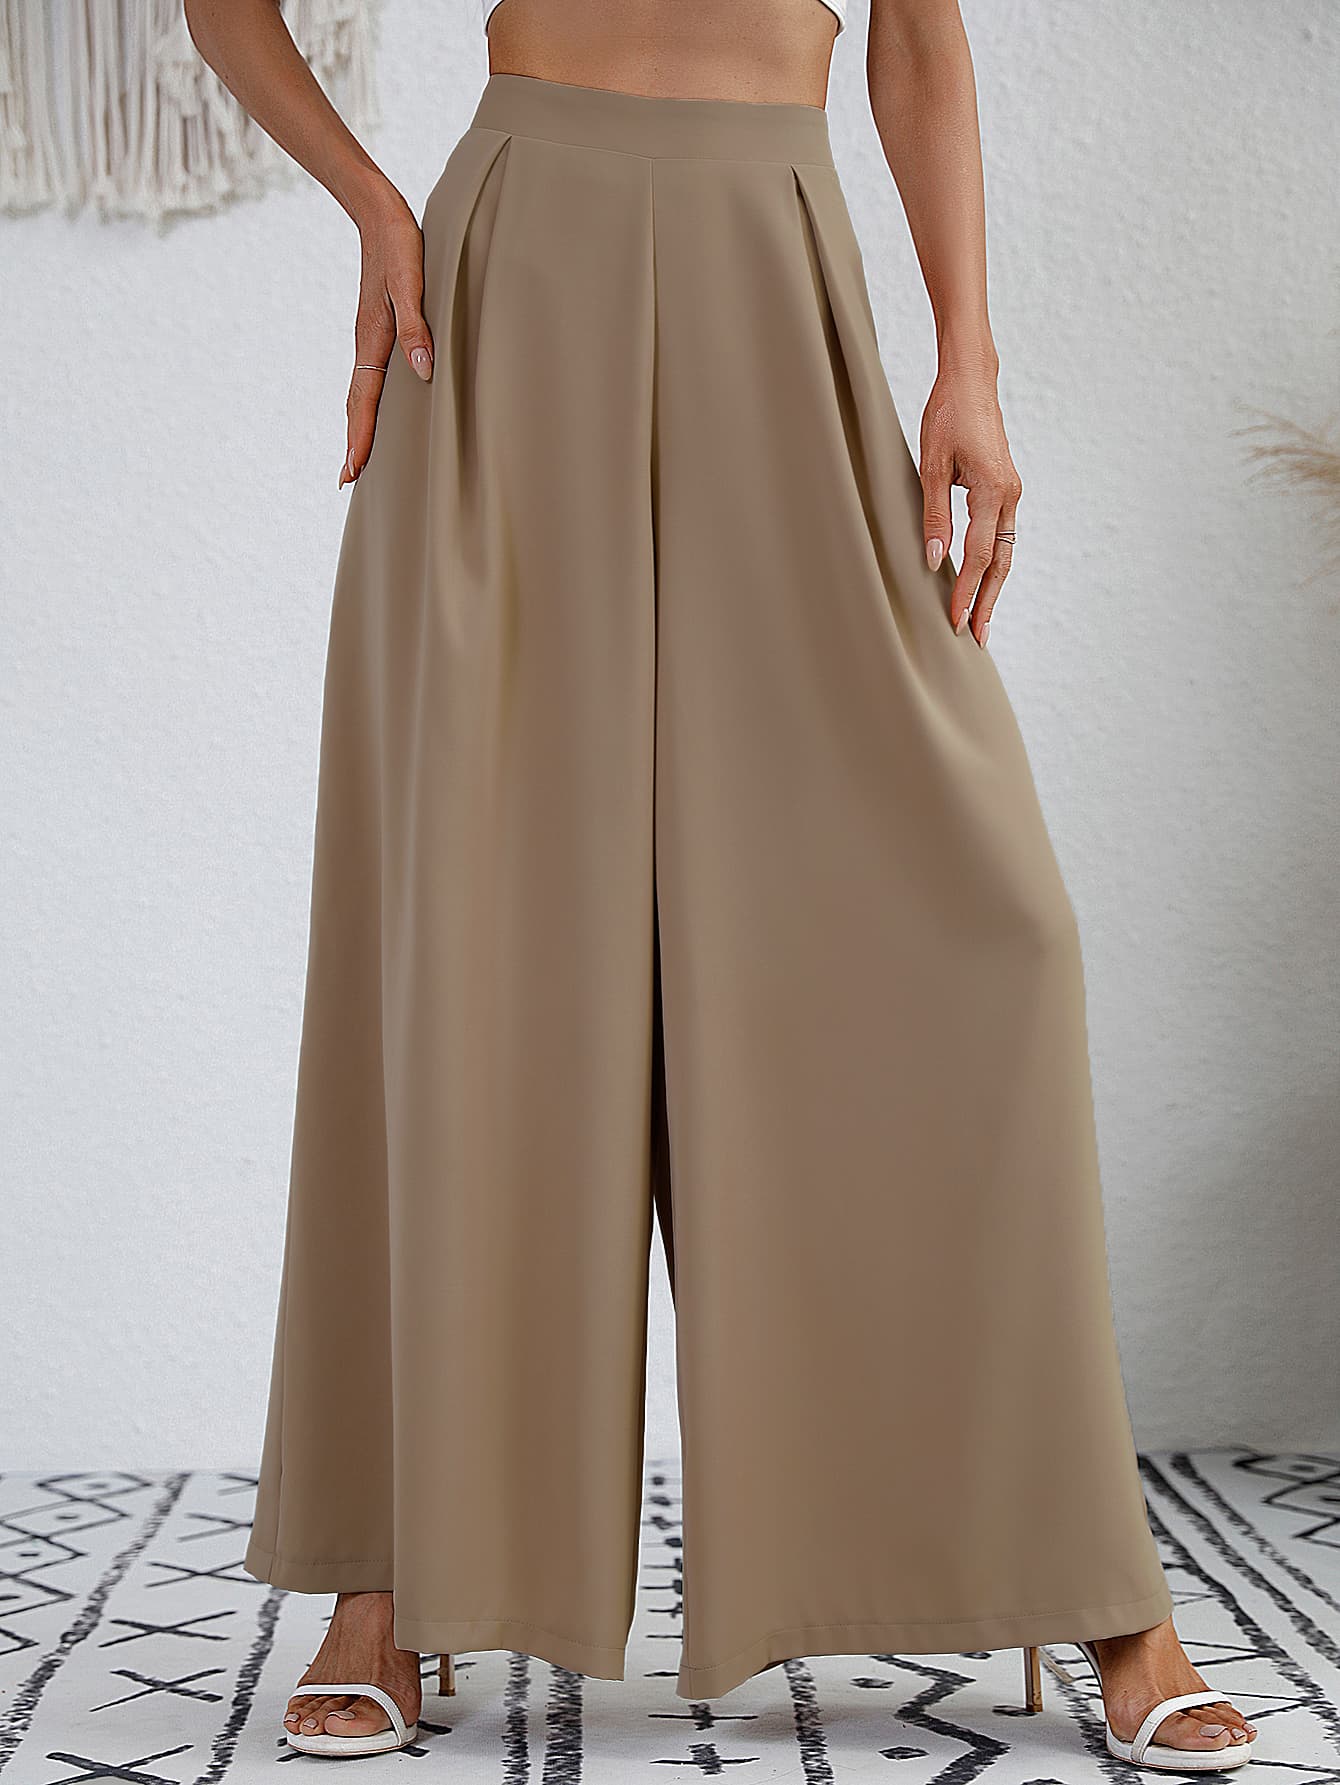 Twin Pleats Ultra Wide Palazzo Pants Trousers in Solid Camel